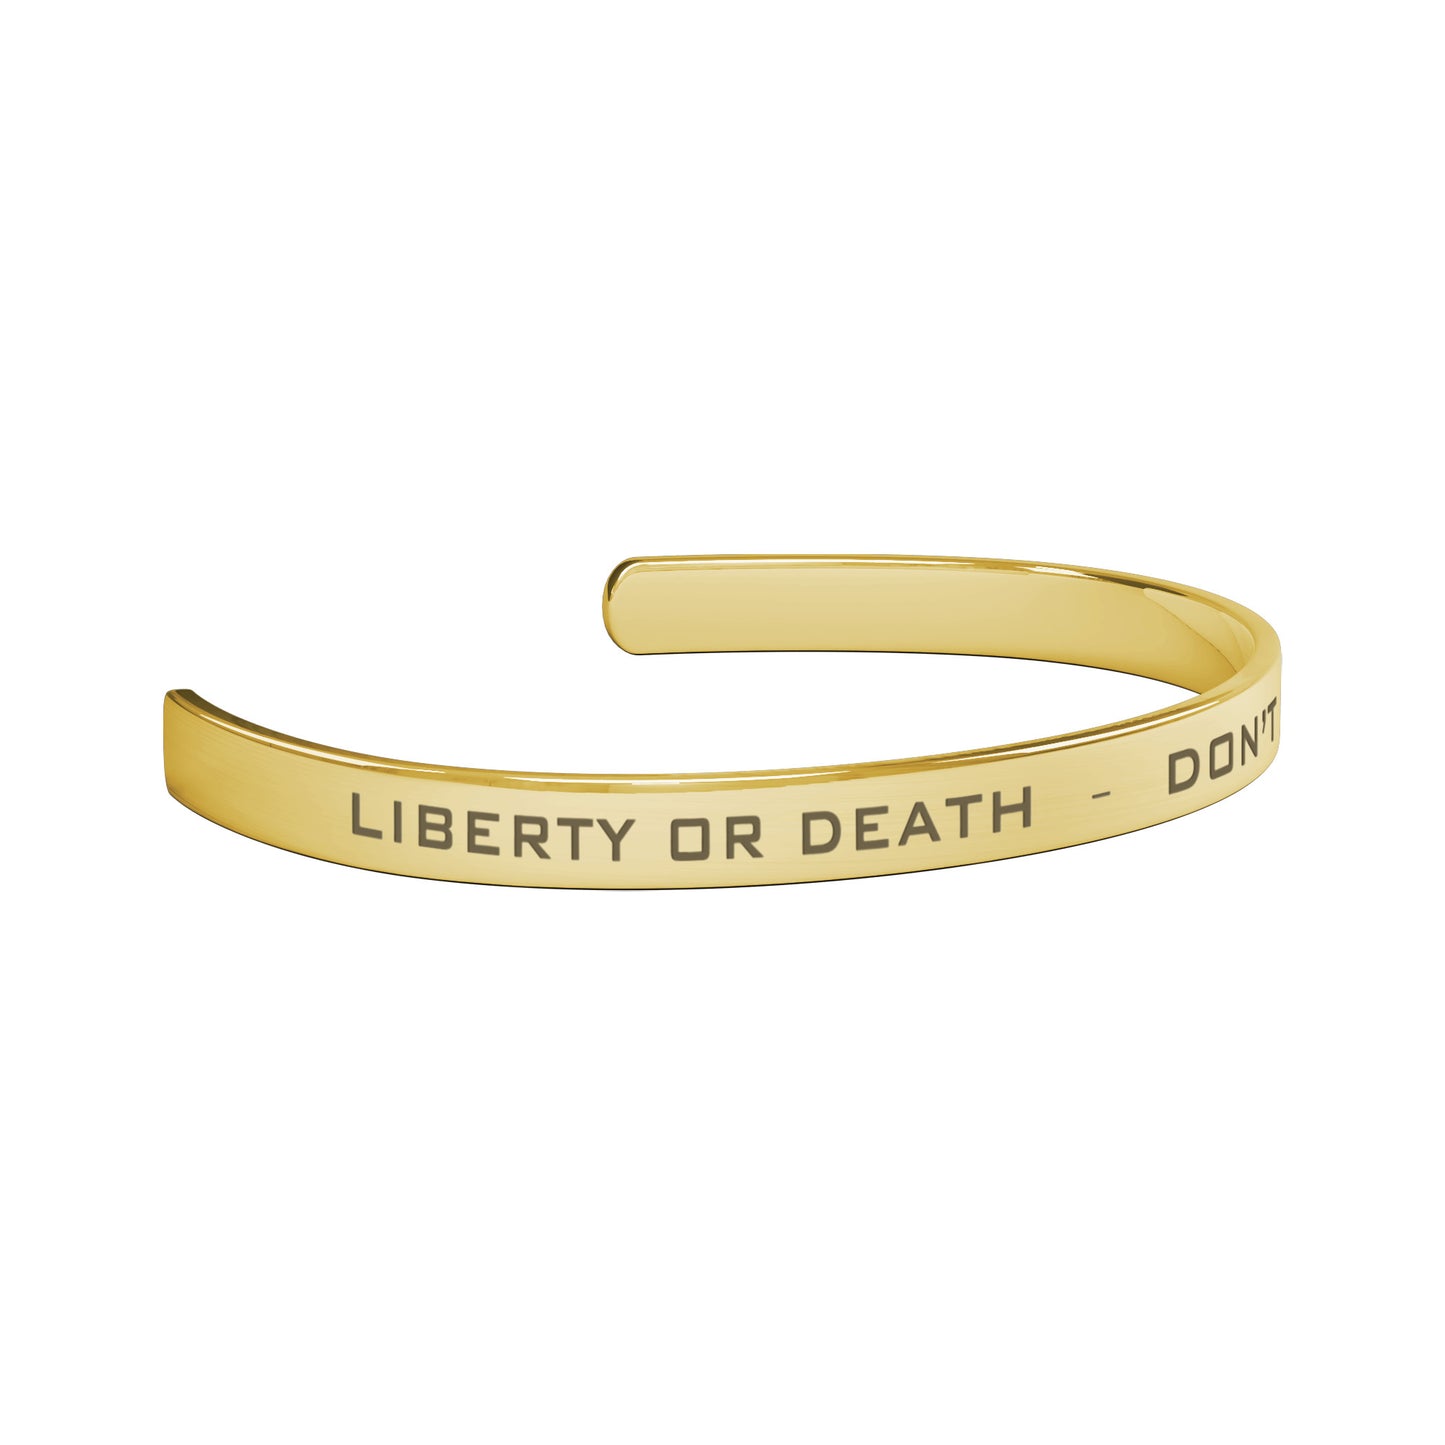 Personalizable Liberty or Death - Don't Tread On Me Cuff Bracelet